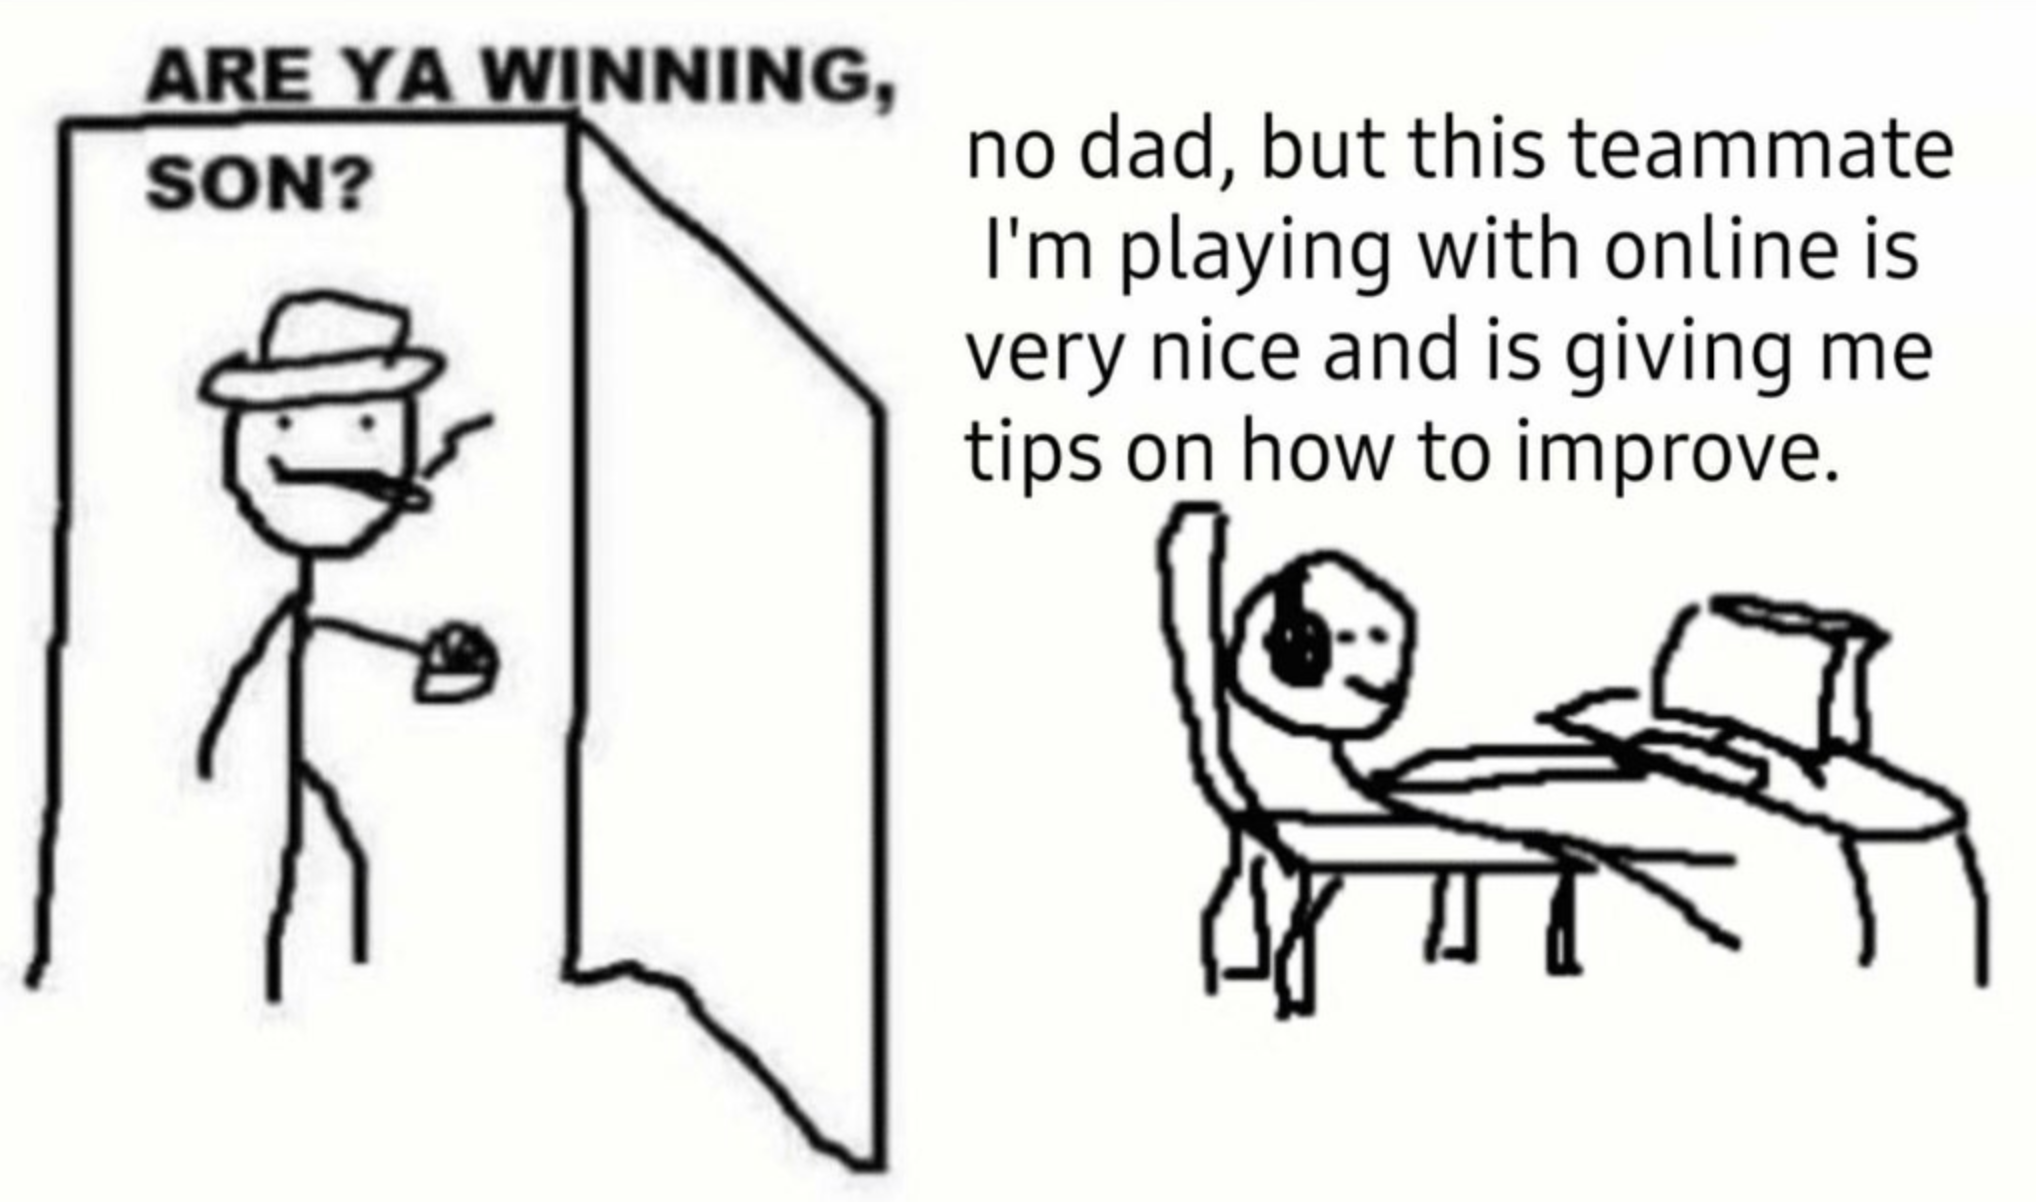 funny gaming memes - you winning son meme - Are Ya Winning, Son? no dad, but this teammate I'm playing with online is very nice and is giving me tips on how to improve.